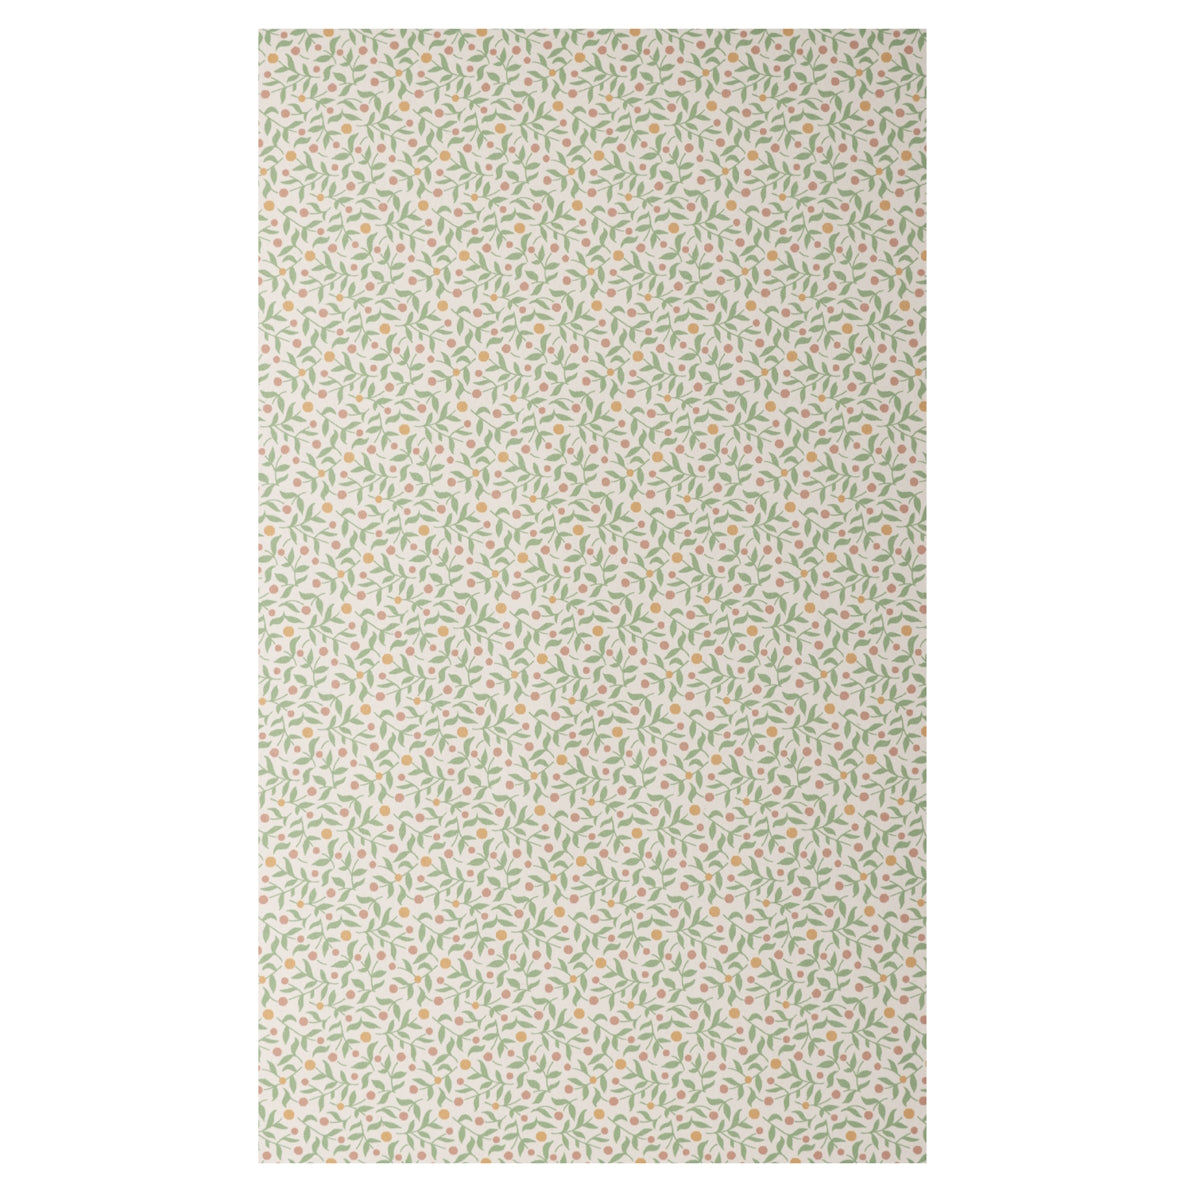 Maileg Gift Wrap Berry Branches 10m